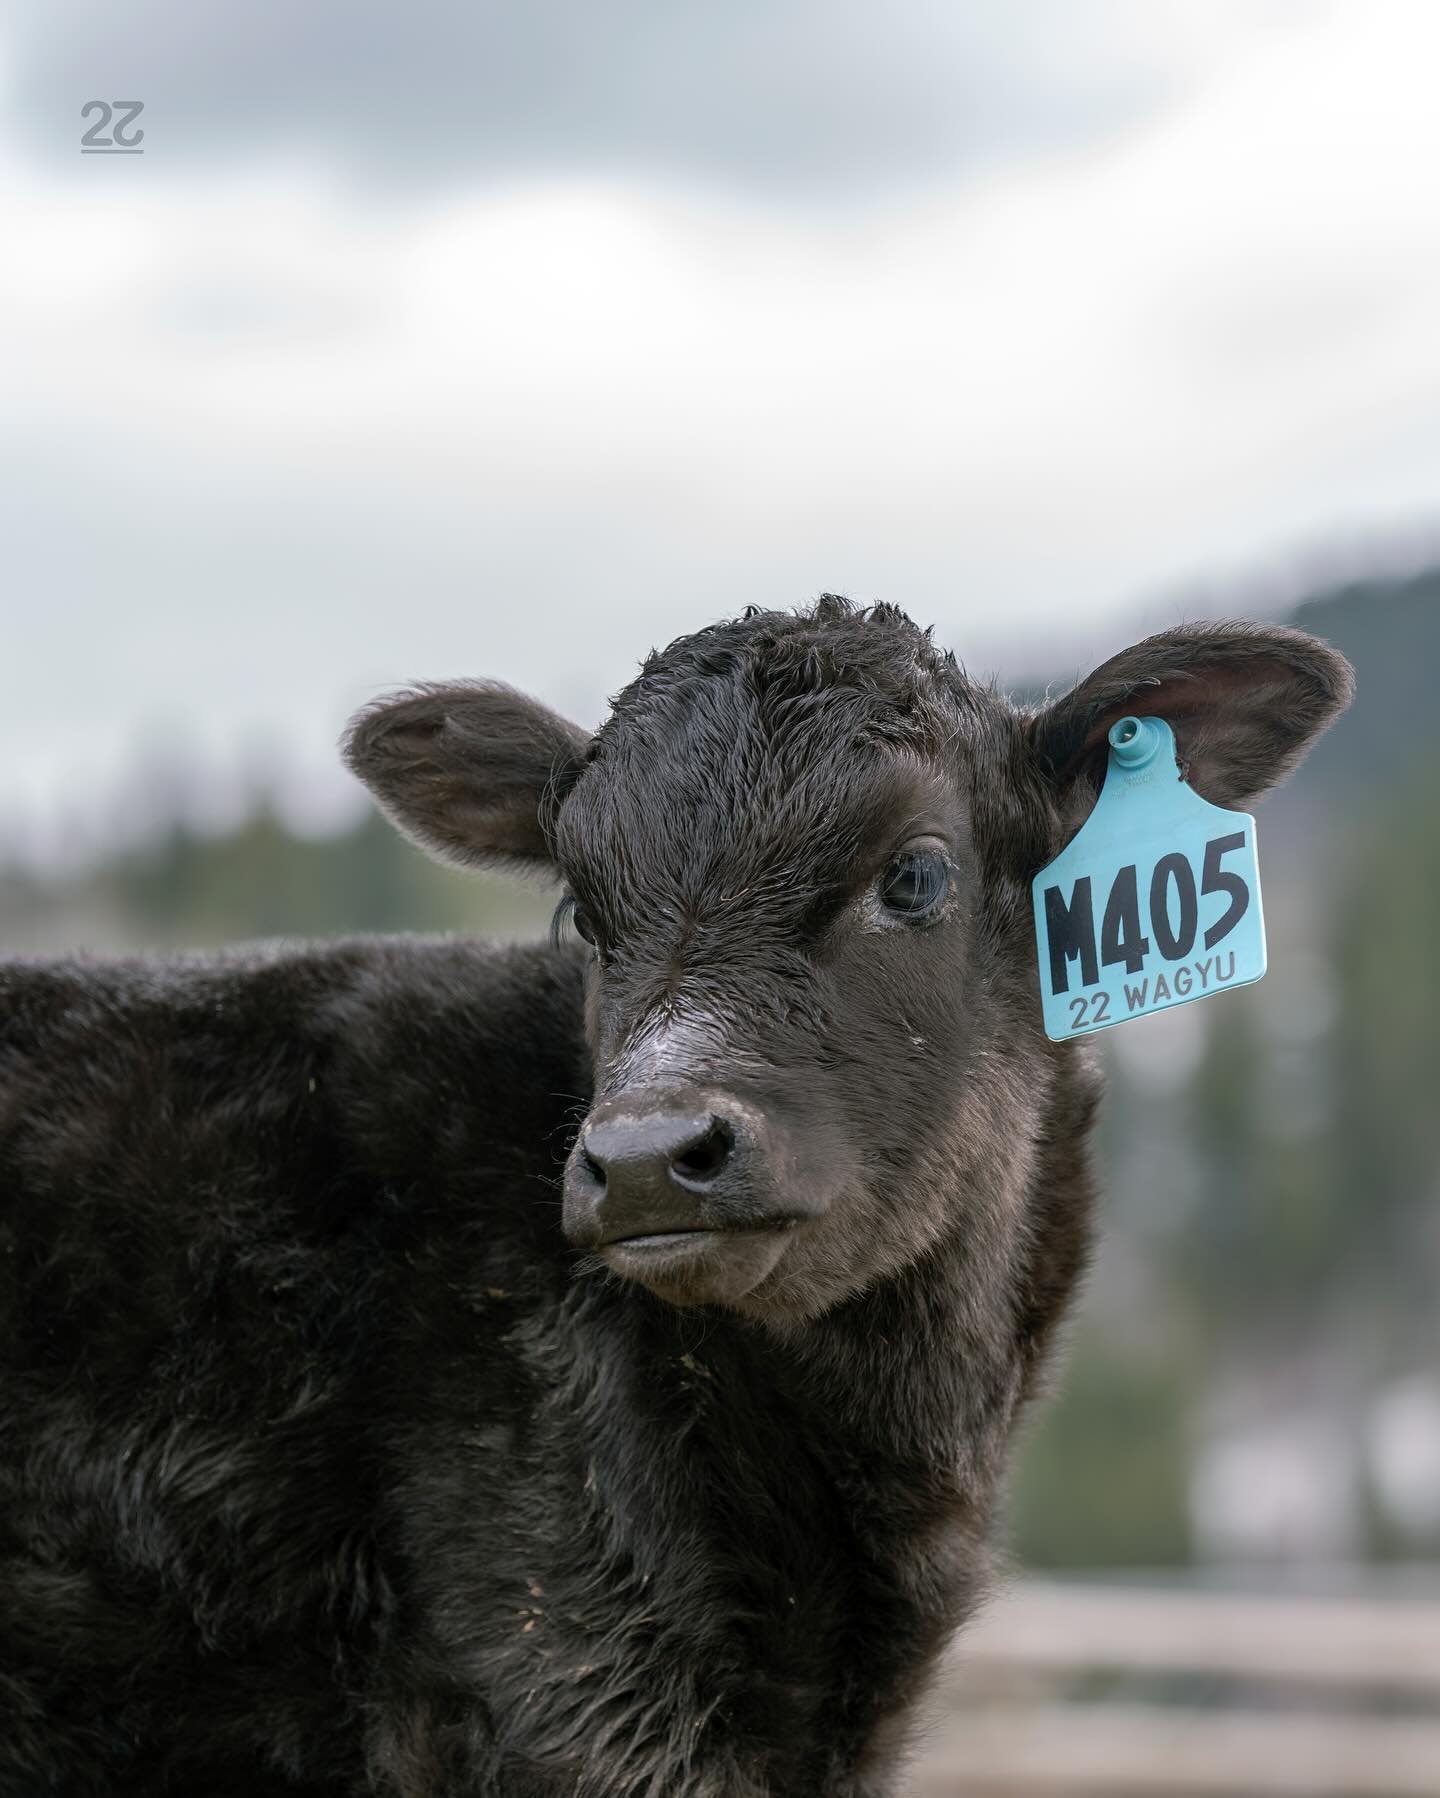 M405 is our Eclipse Baby. Her registered name will be 22 Nisshoku M405. &ldquo;Nisshoku&rdquo; is Japanese for &ldquo;Solar Eclipse&rdquo;, which happened here in the United States on the day she was born! #wagyu #22 #22wagyu #22genetics